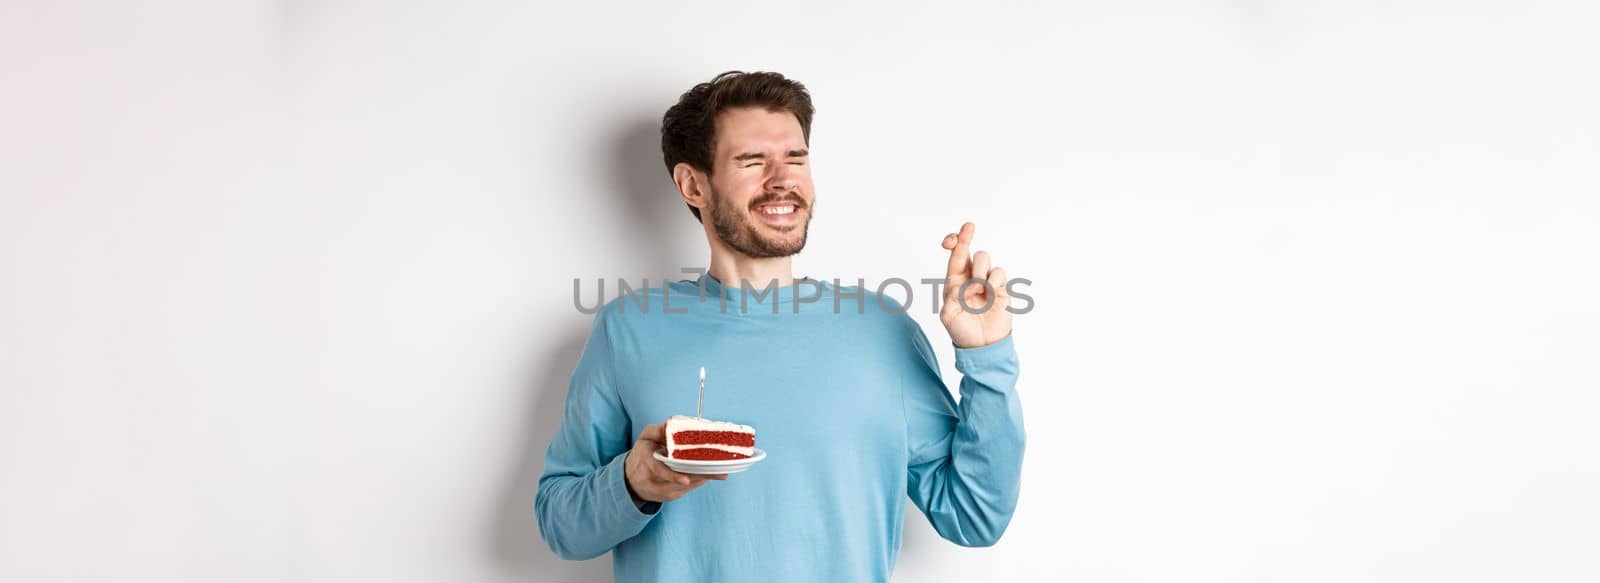 Celebration and holidays concept. Young man celebrating birthday, cross fingers for good luck, making wish on bday cake with lit candle, standing over white background.